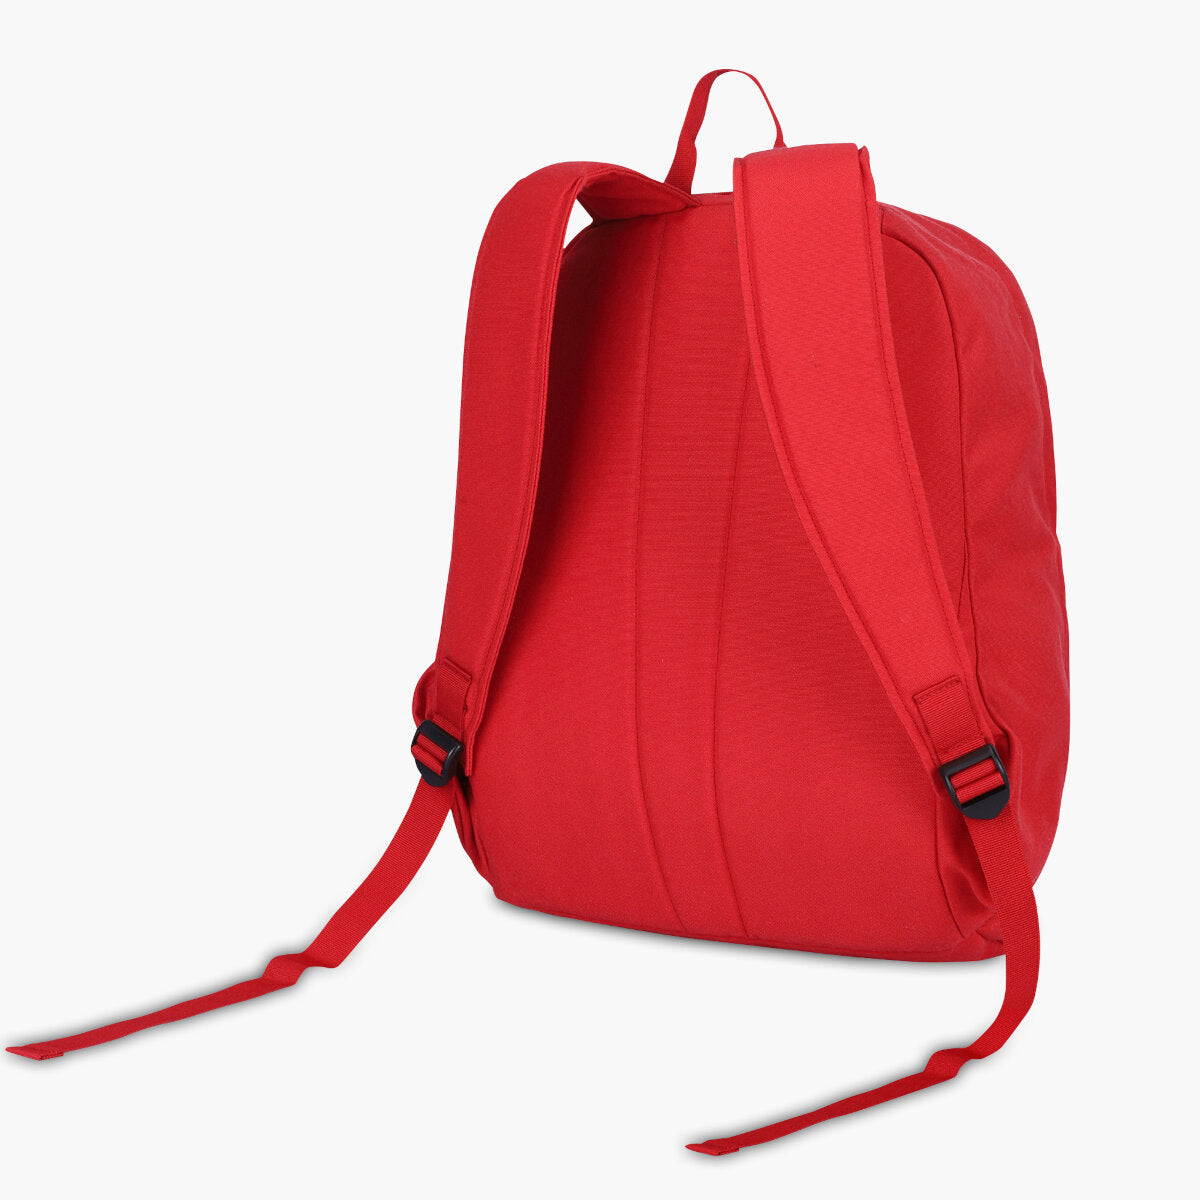 Red | Protecta Steady Progress Laptop Backpack - 7